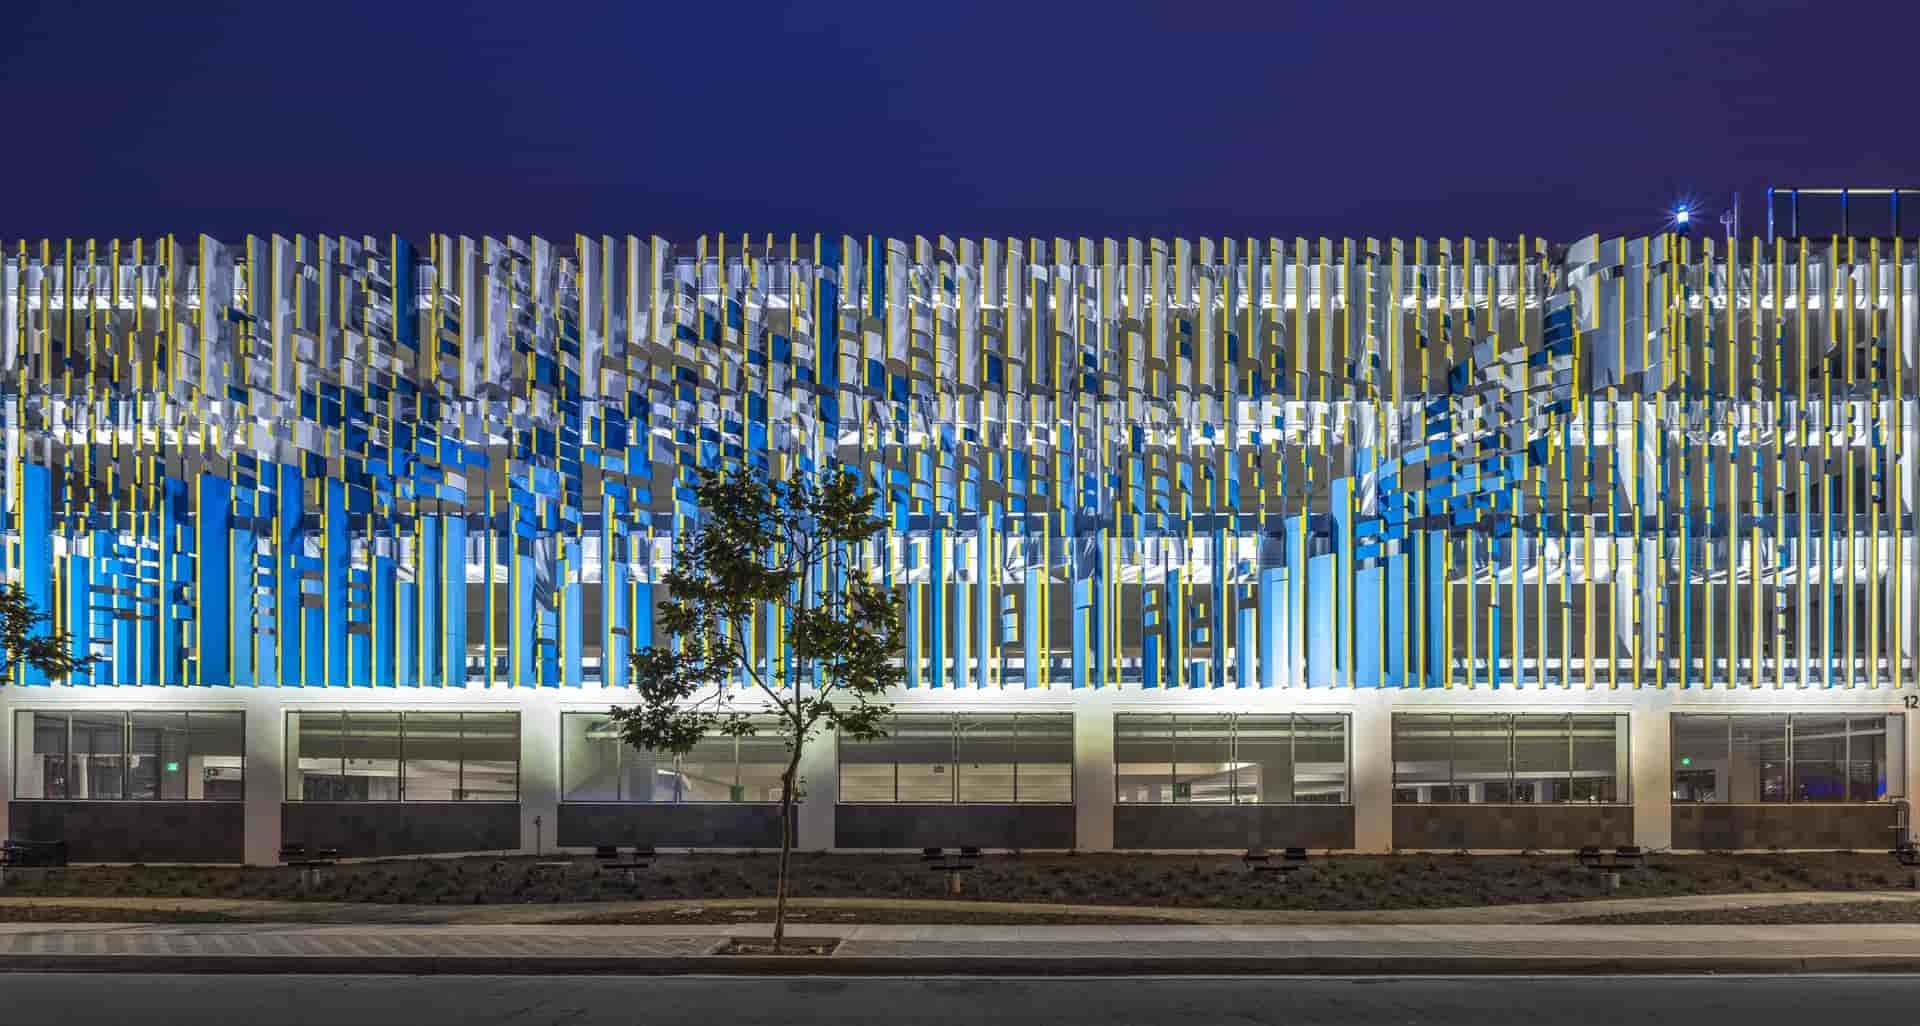 The aluminium panelled facade of Martin Luther King, Jr. Medical Campus Parking Structure